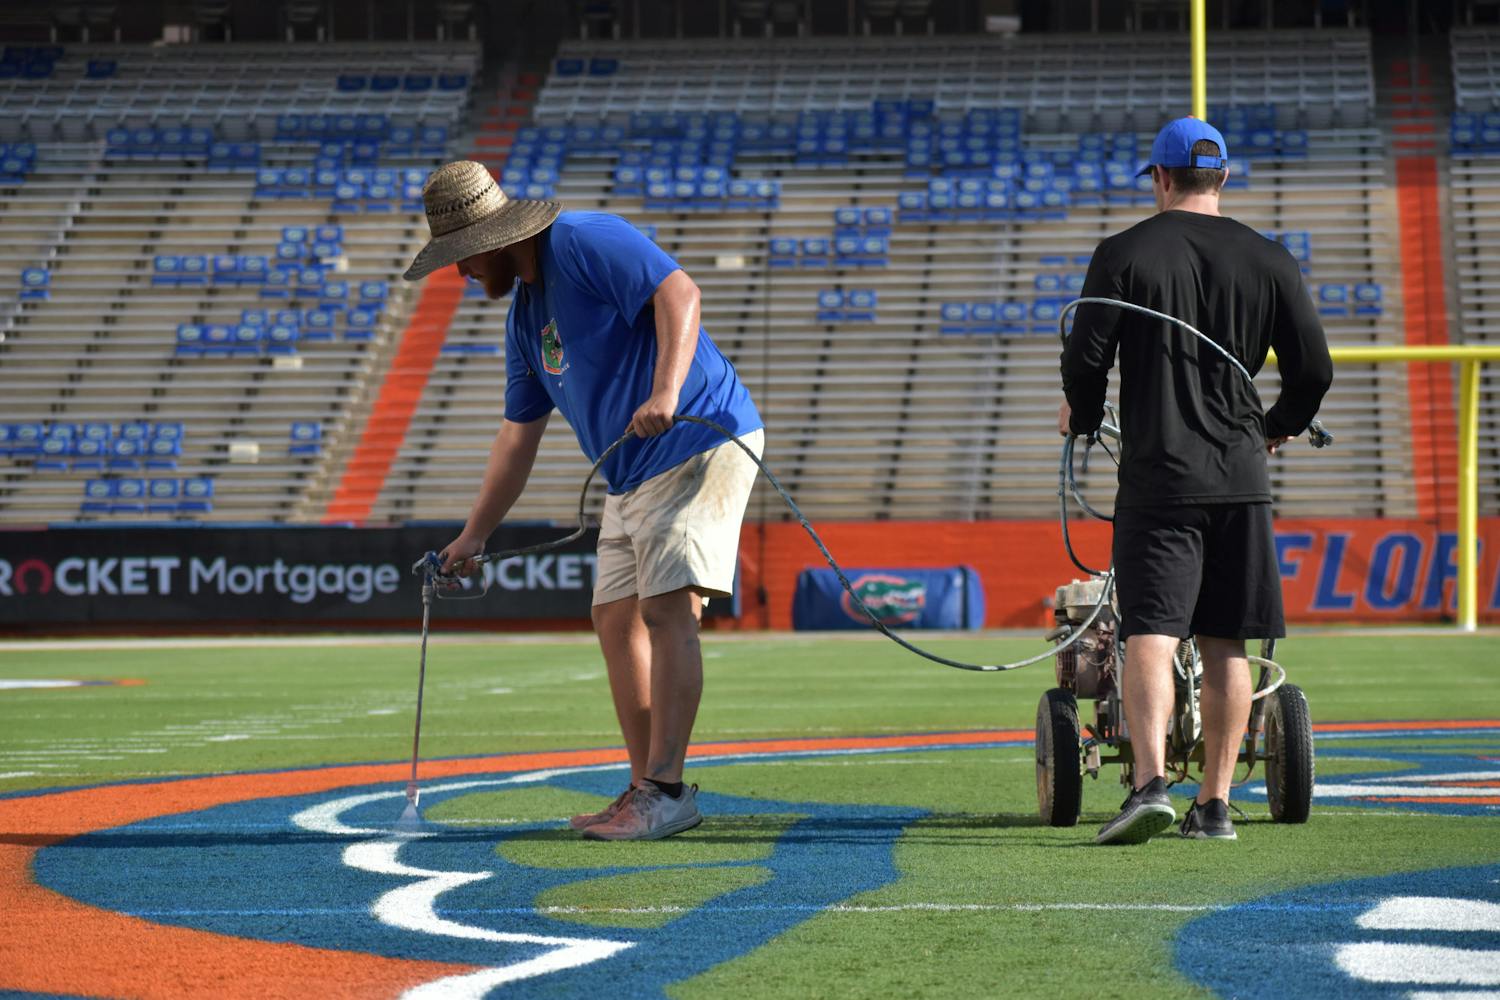 Field maintenance staff add the final touches to the Steve Spurrier-Florida Field in preparation for game day on Friday, Sept. 3, 2021.